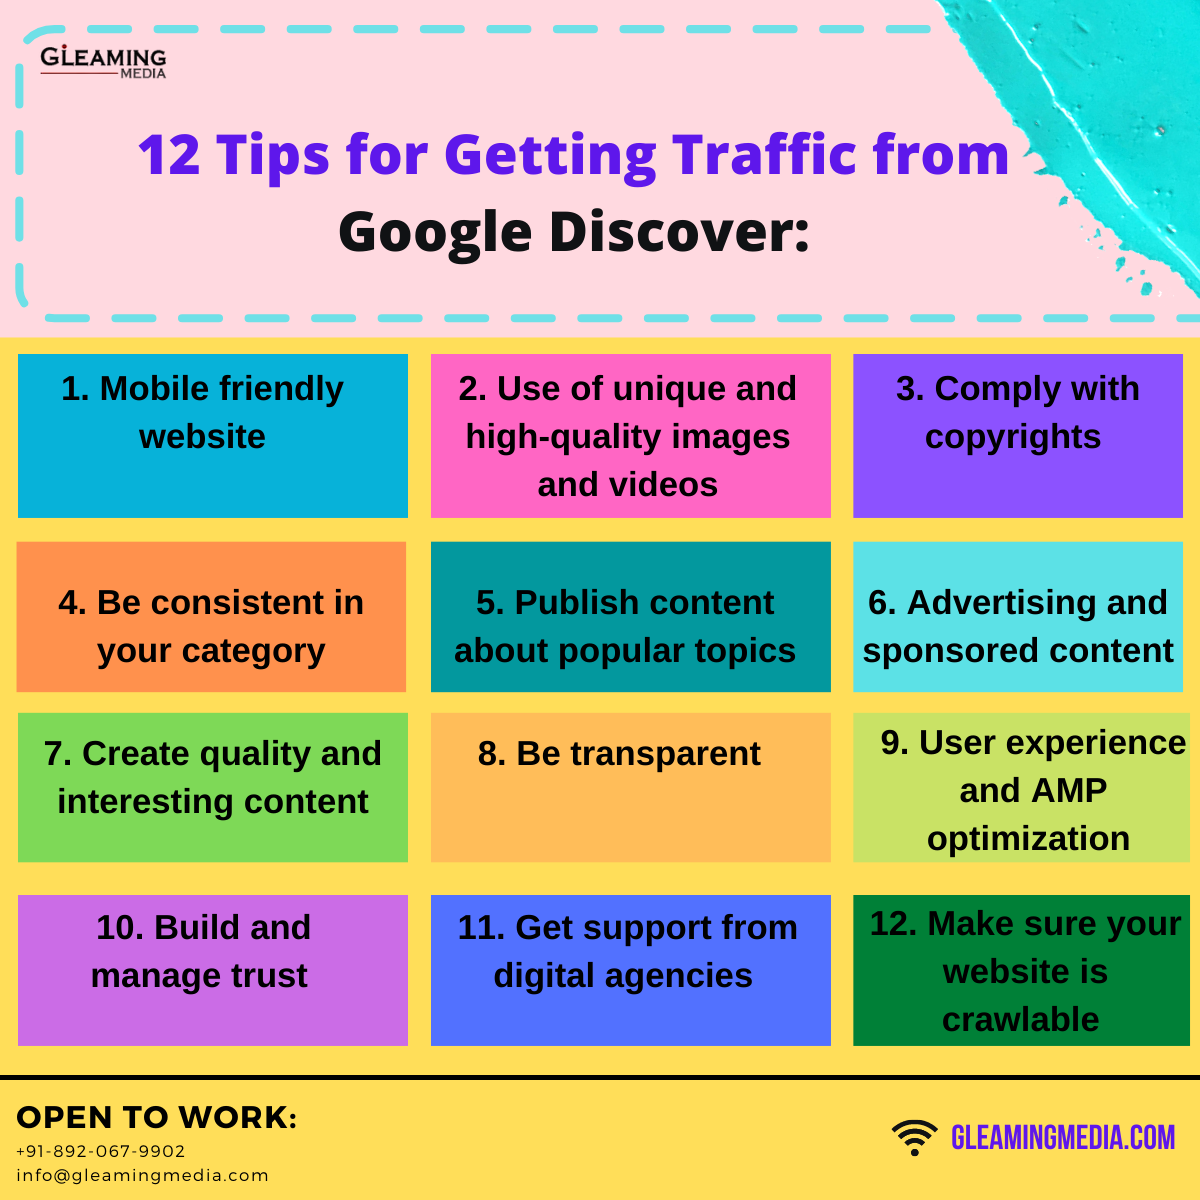 12 Tips for Getting Traffic from Google Discover by Gleaming Media